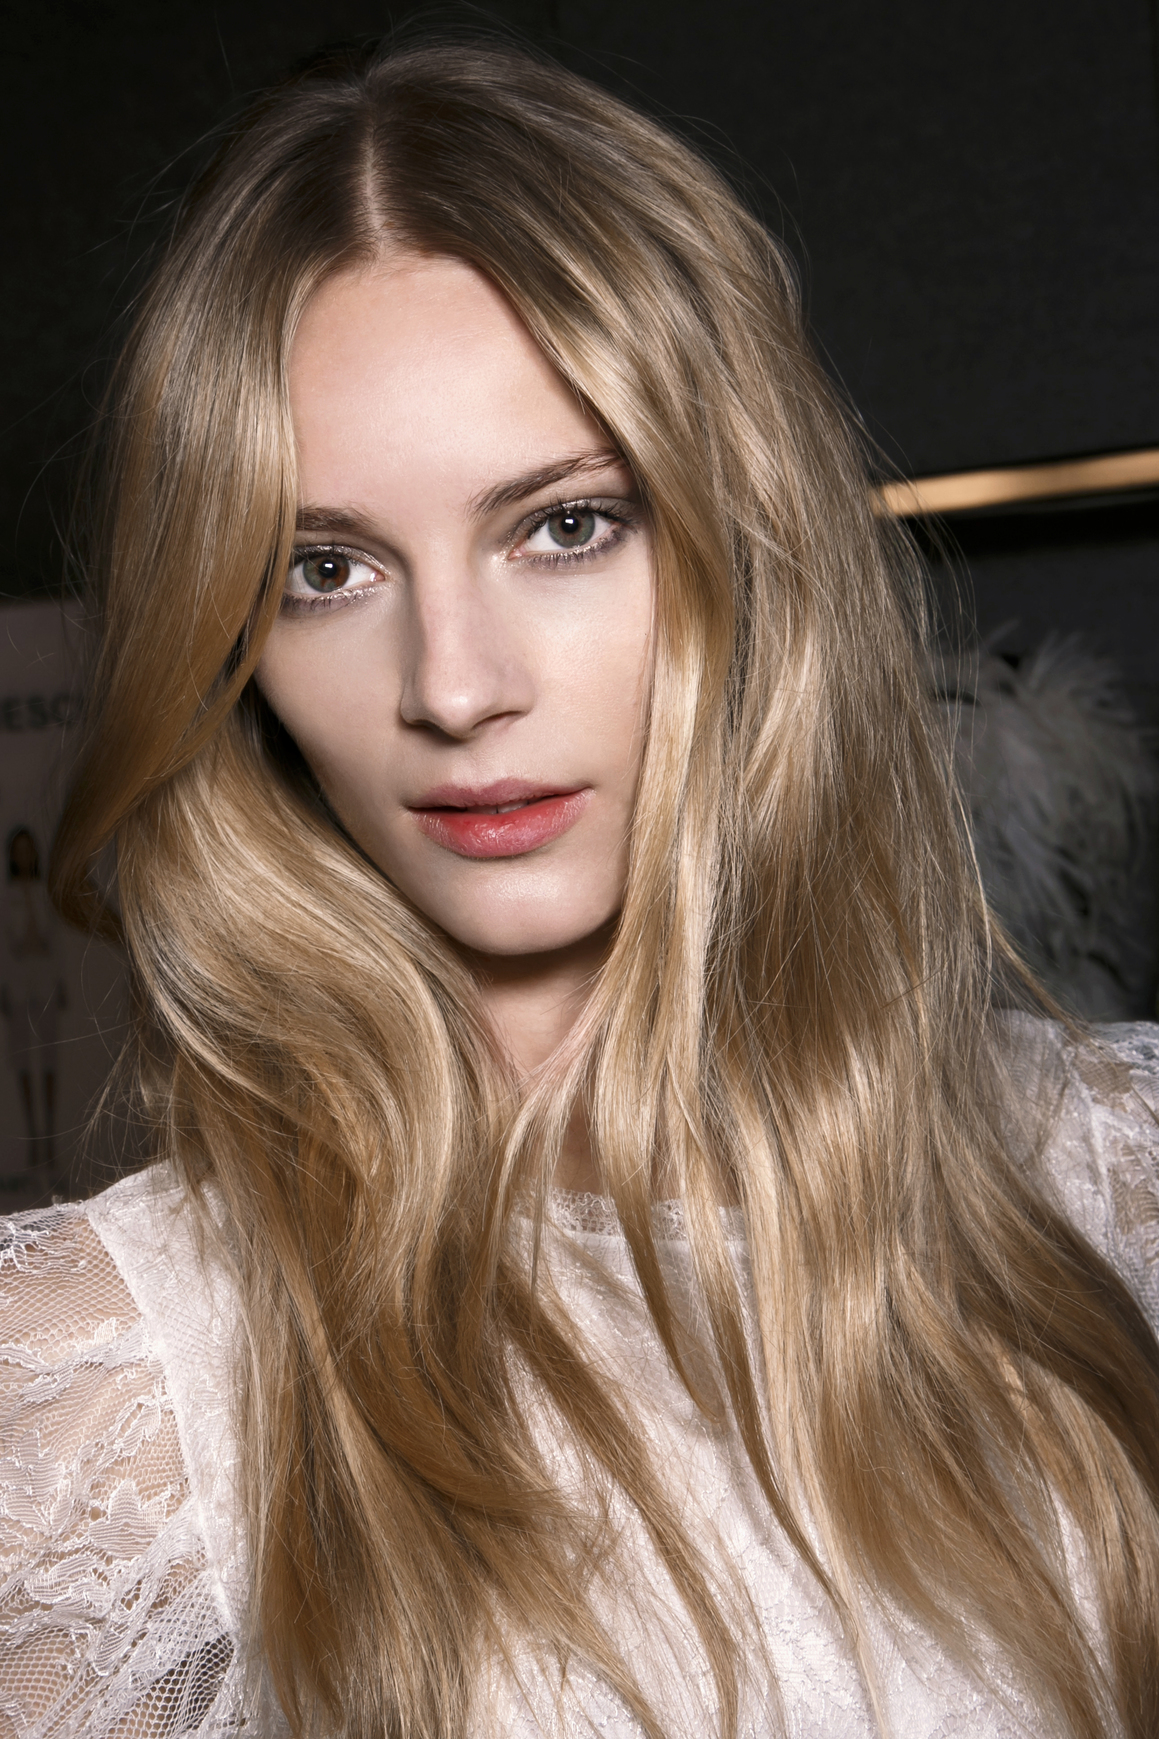 Shiny Hair Tips: What to Do For Amazing Hair | StyleCaster